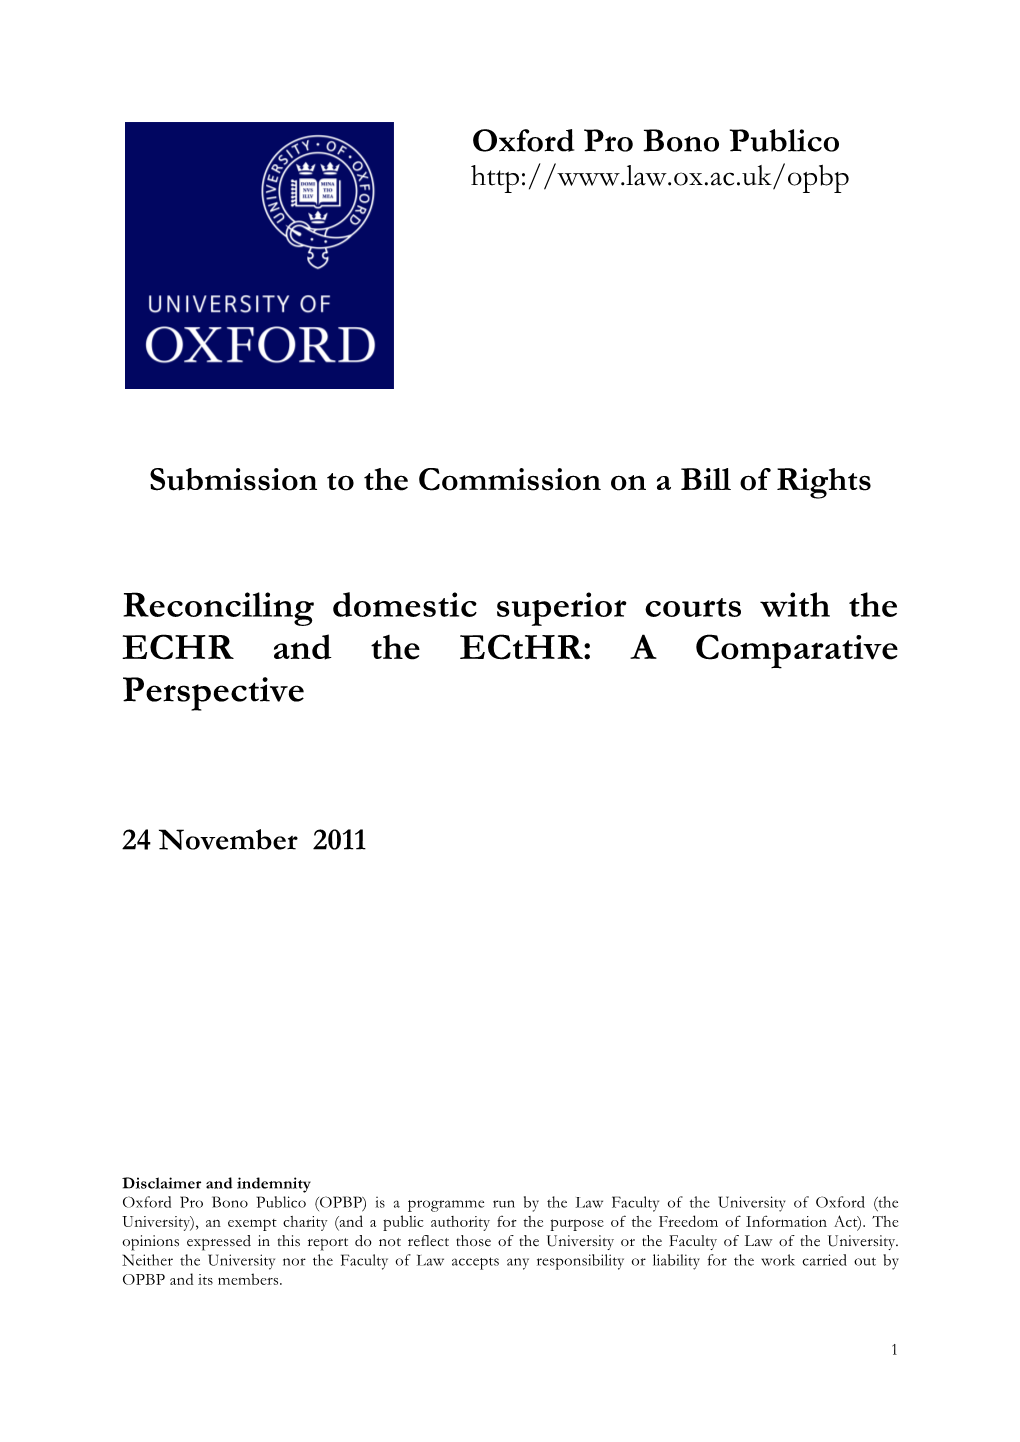 Reconciling Domestic Superior Courts with the ECHR and Ecthr